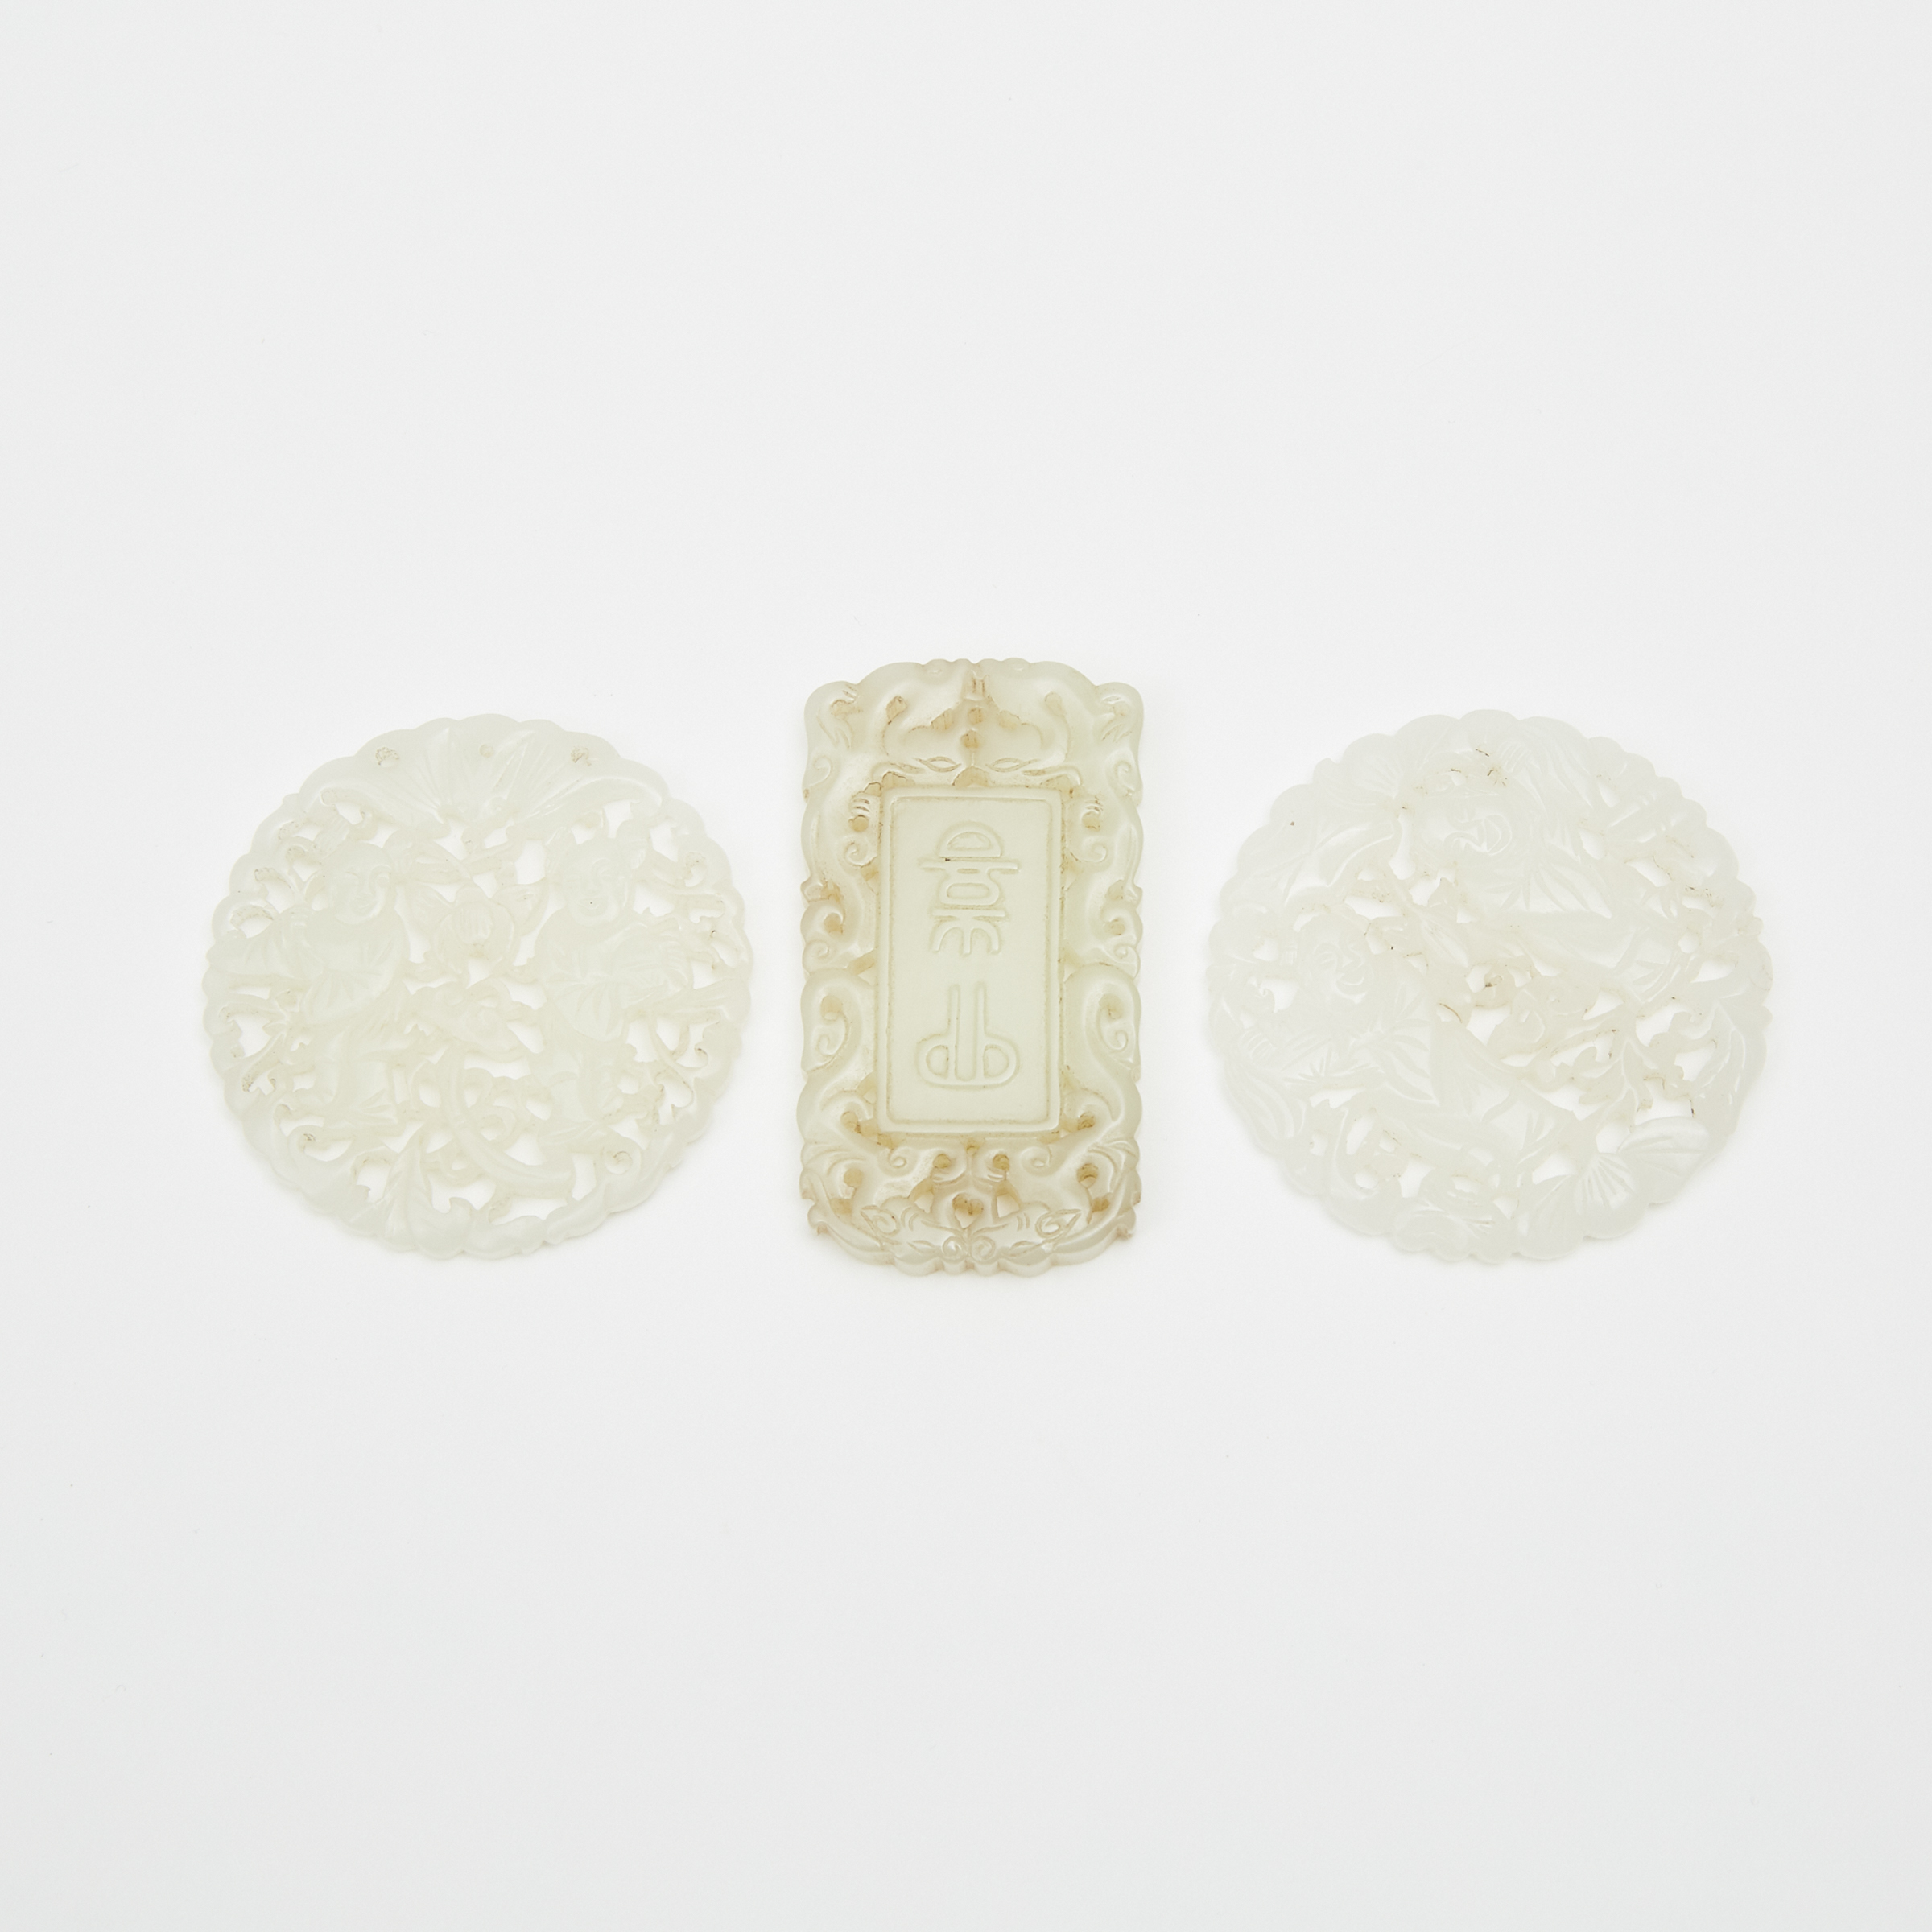 Two White Jade Openwork Plaques and a Yellow Jade Rectangular Pendant